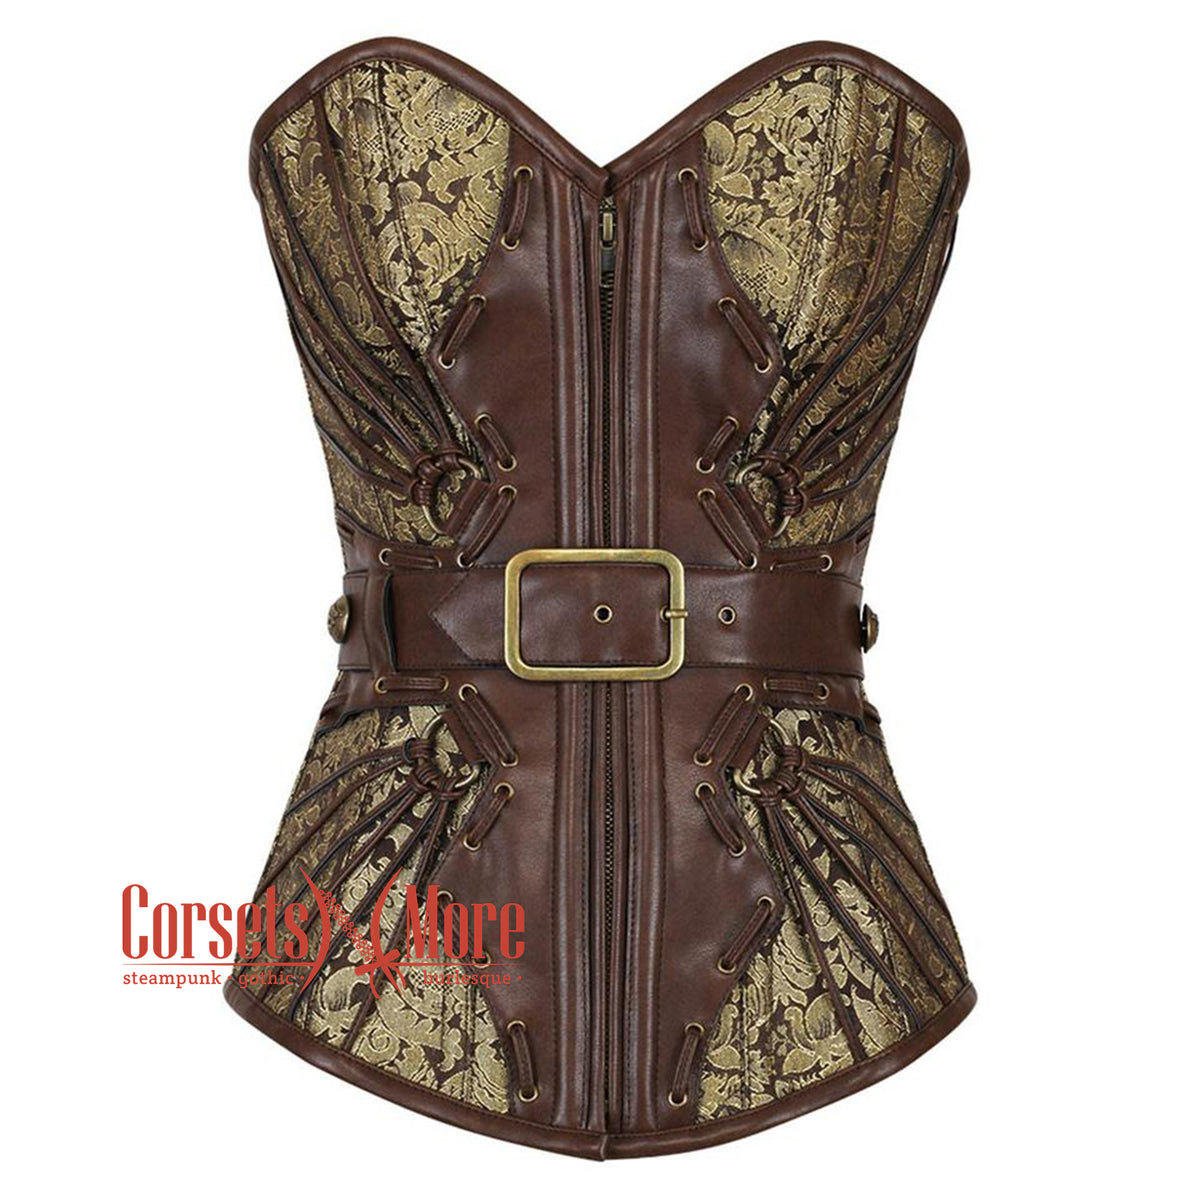 Brown And Golden Brocade Leather Belt Steampunk Waist Training Overbus

– CorsetsNmore